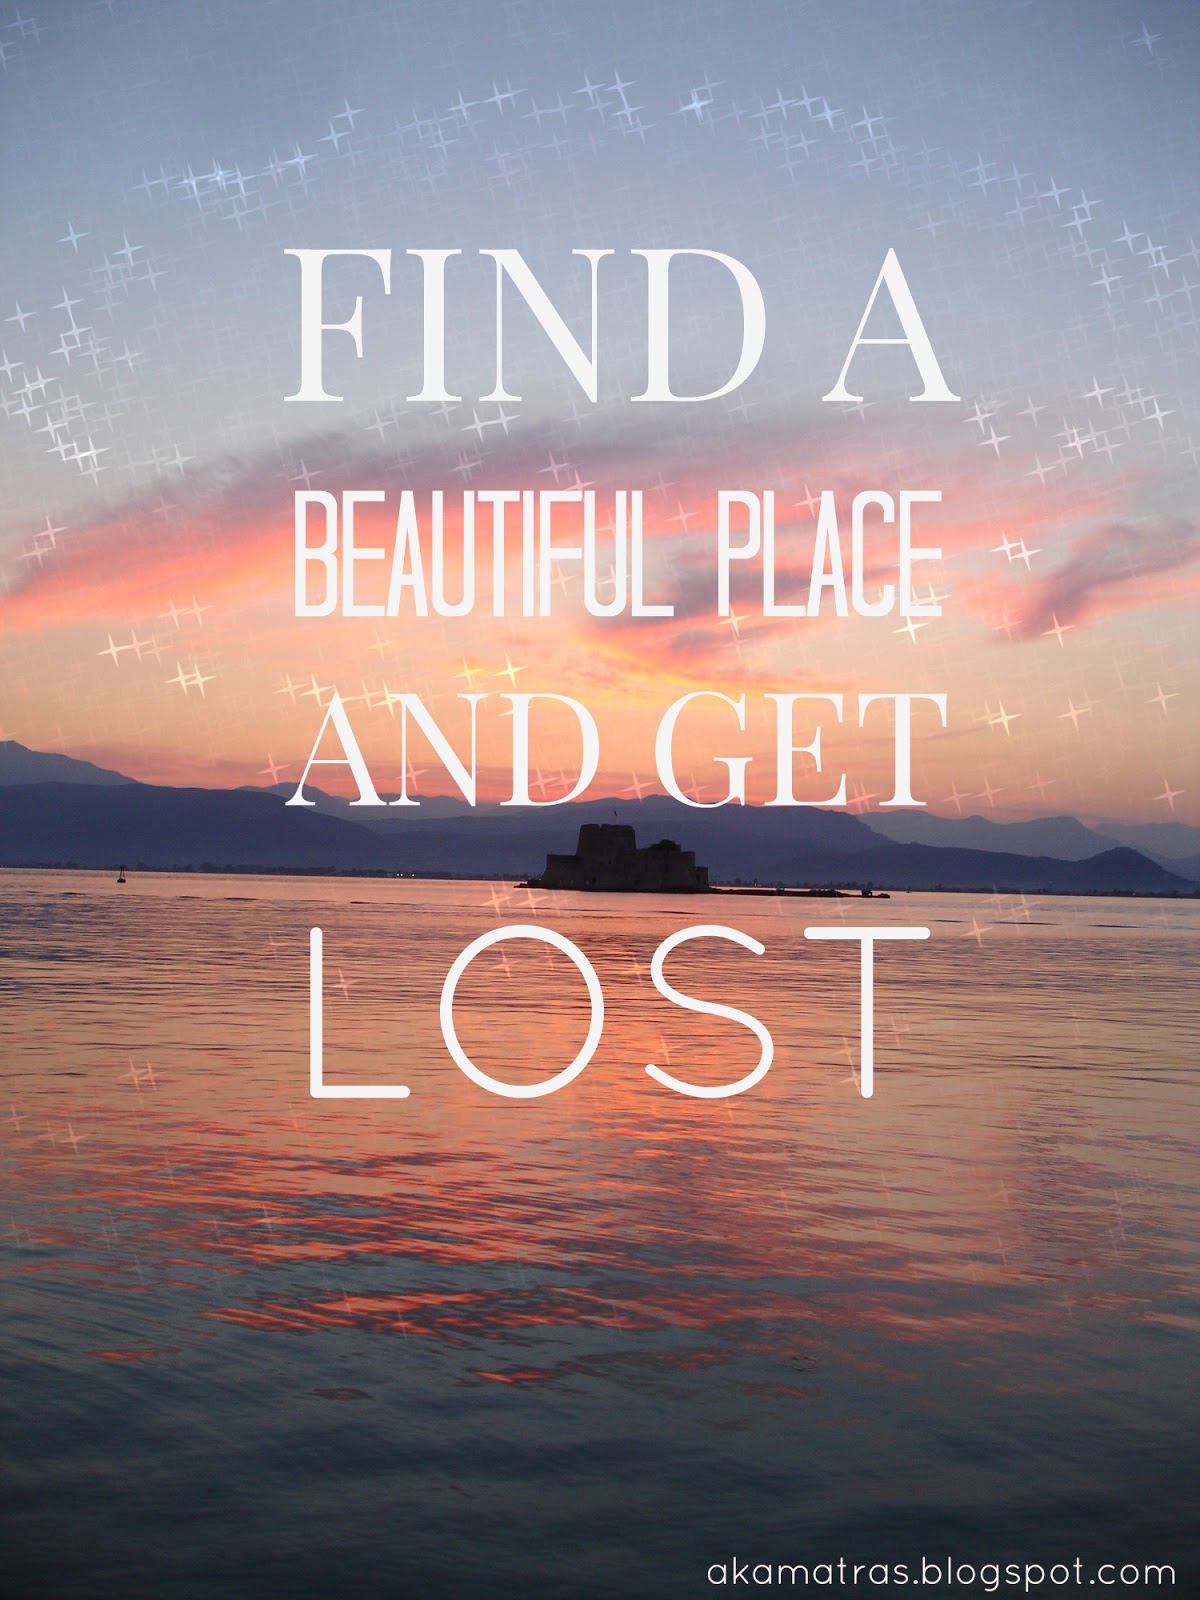 Relax and get lost!